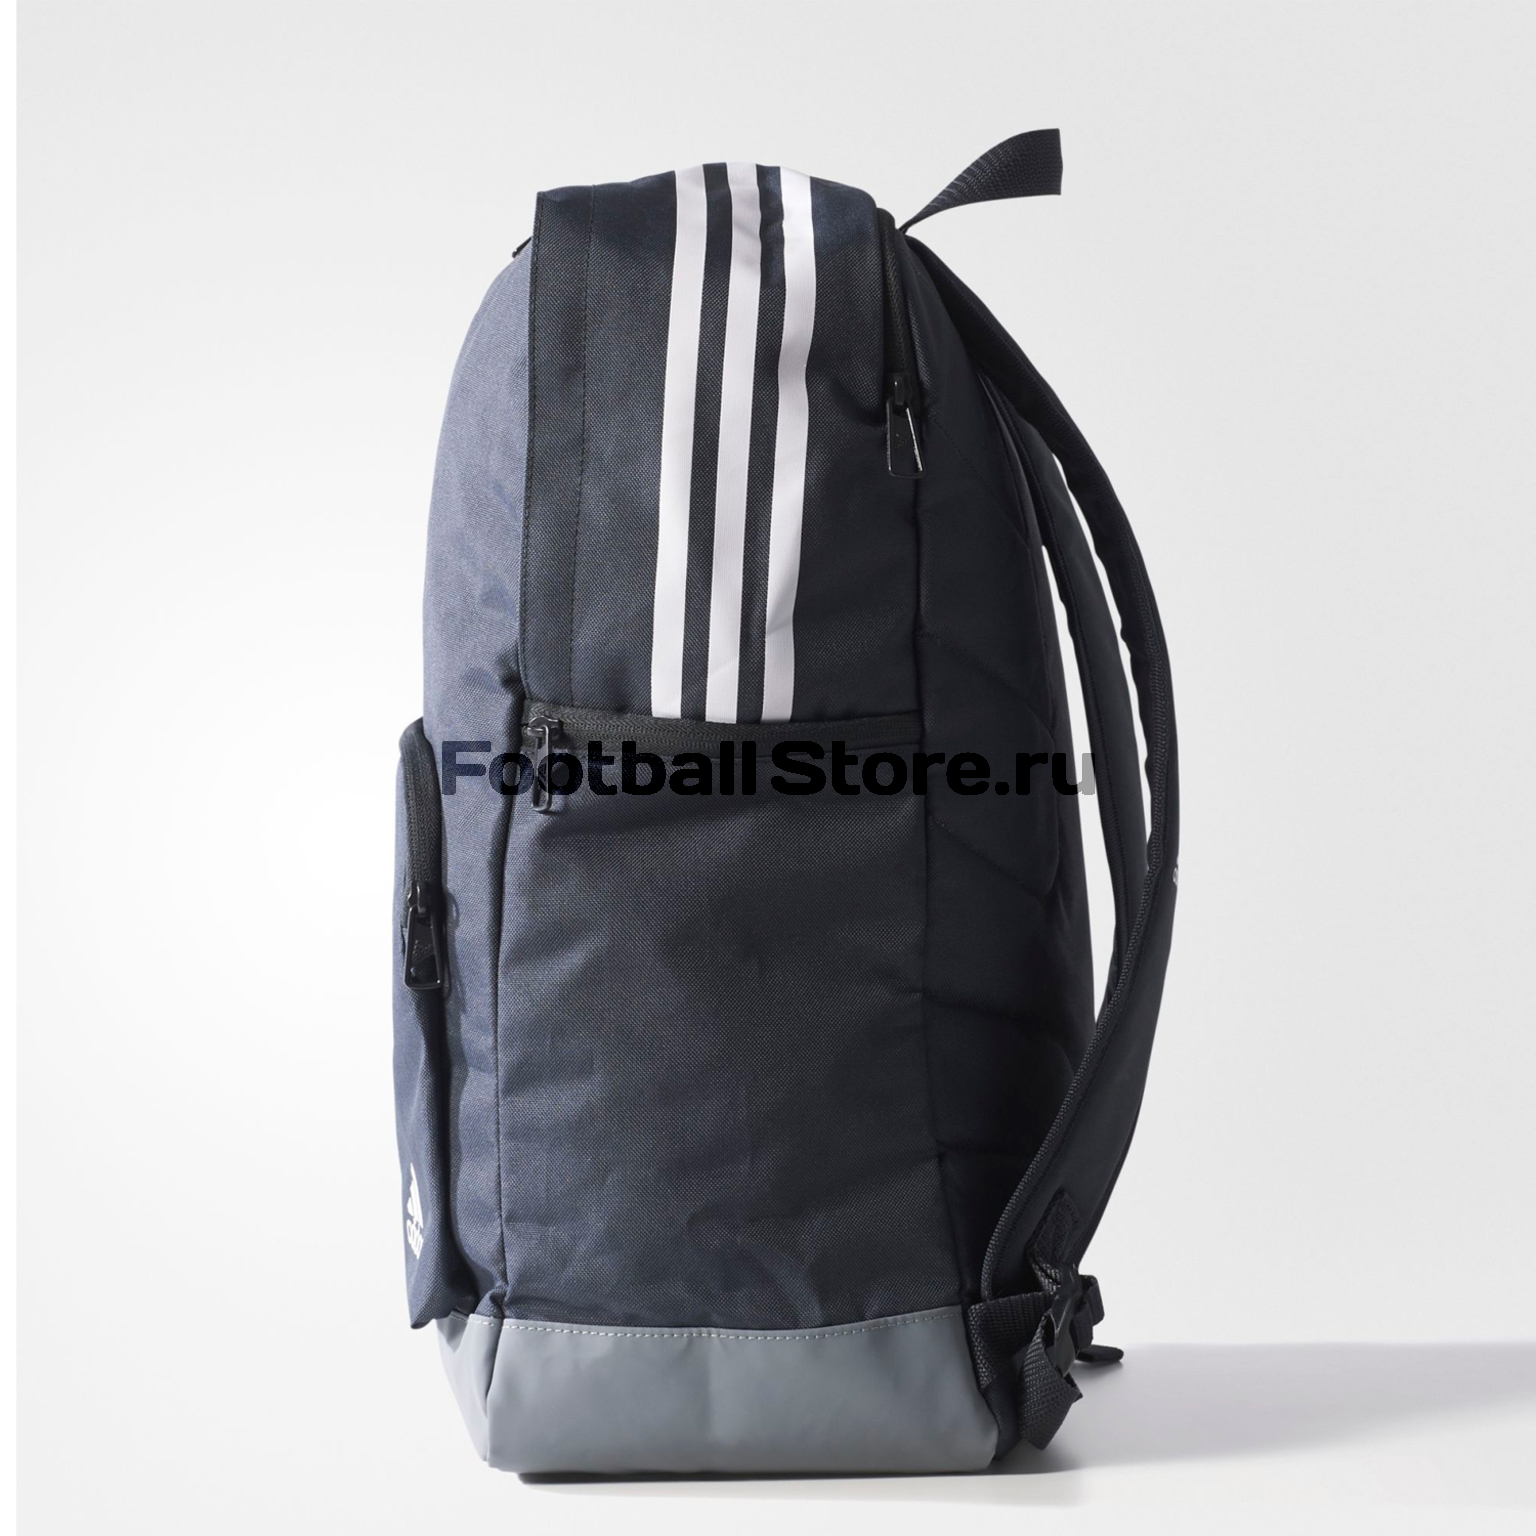 Рюкзак Adidas Manchester United Backpack BR7023